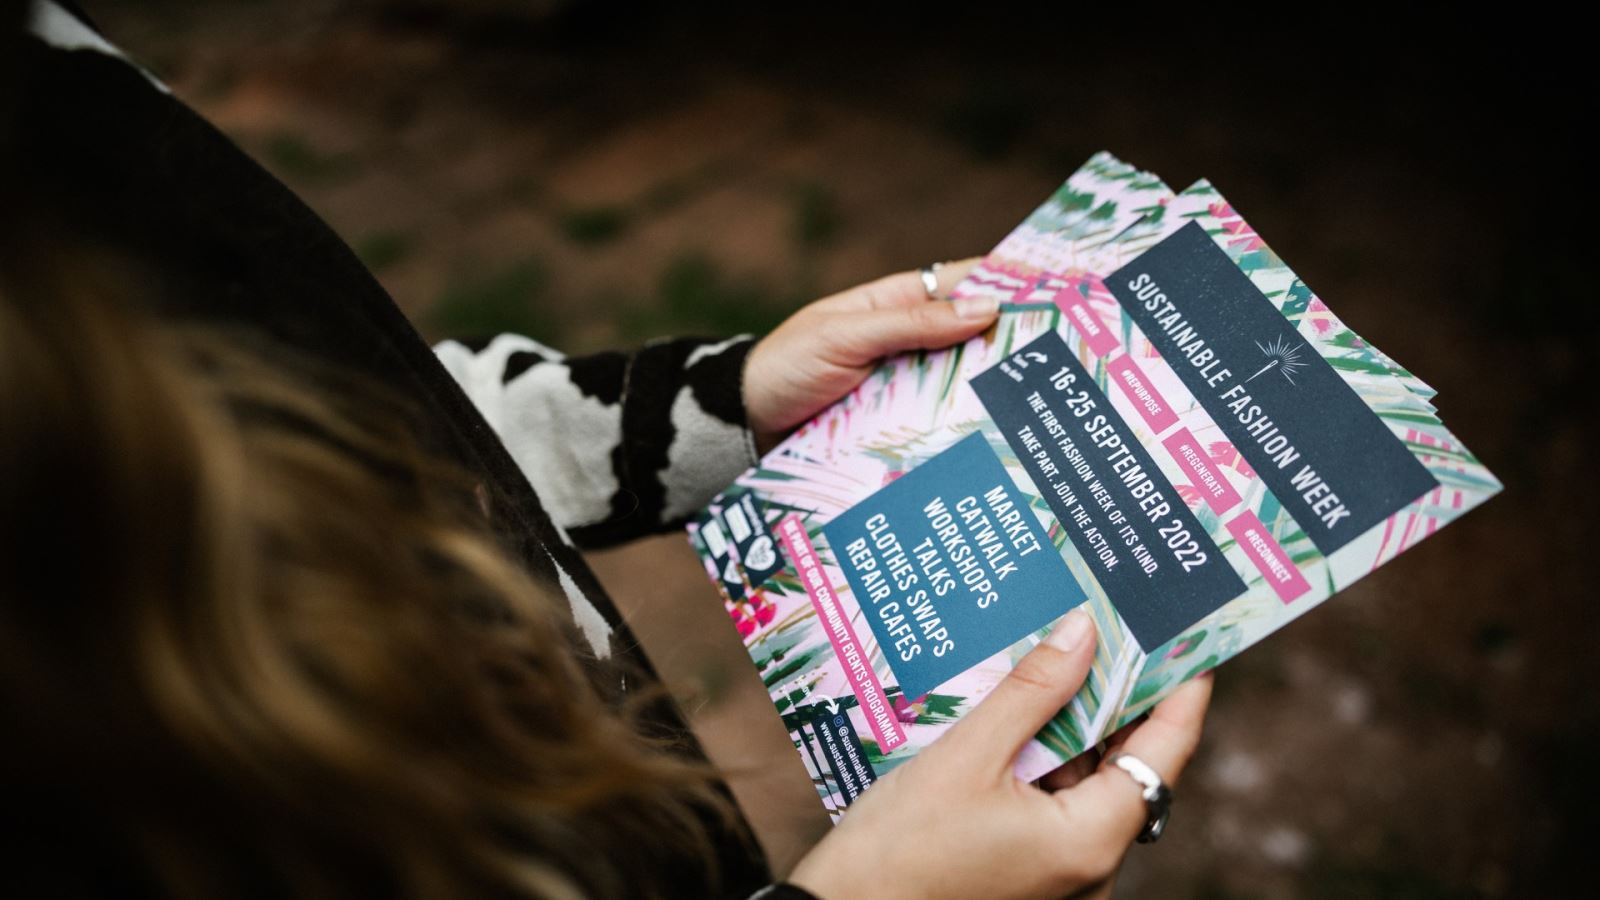 Flyers for Sustainable Fashion Week 2022